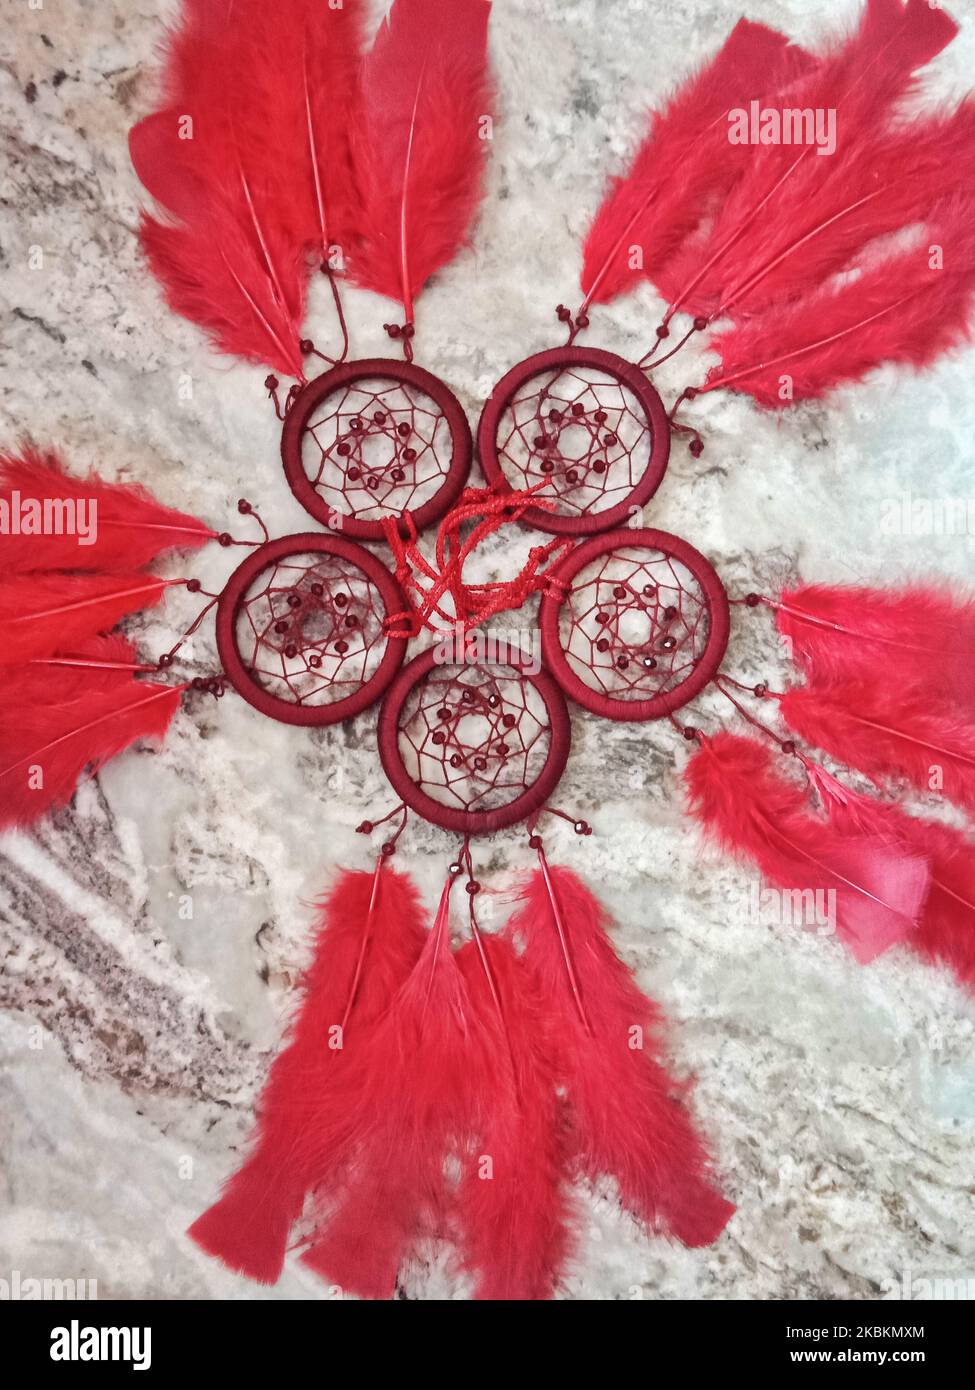 Creativity Dream Catcher for Girl White Romantic Unique Dreamcatcher  Feathers Wall Hanging Ornament Indian Handmade Dream Catchers Wind Chimes  for